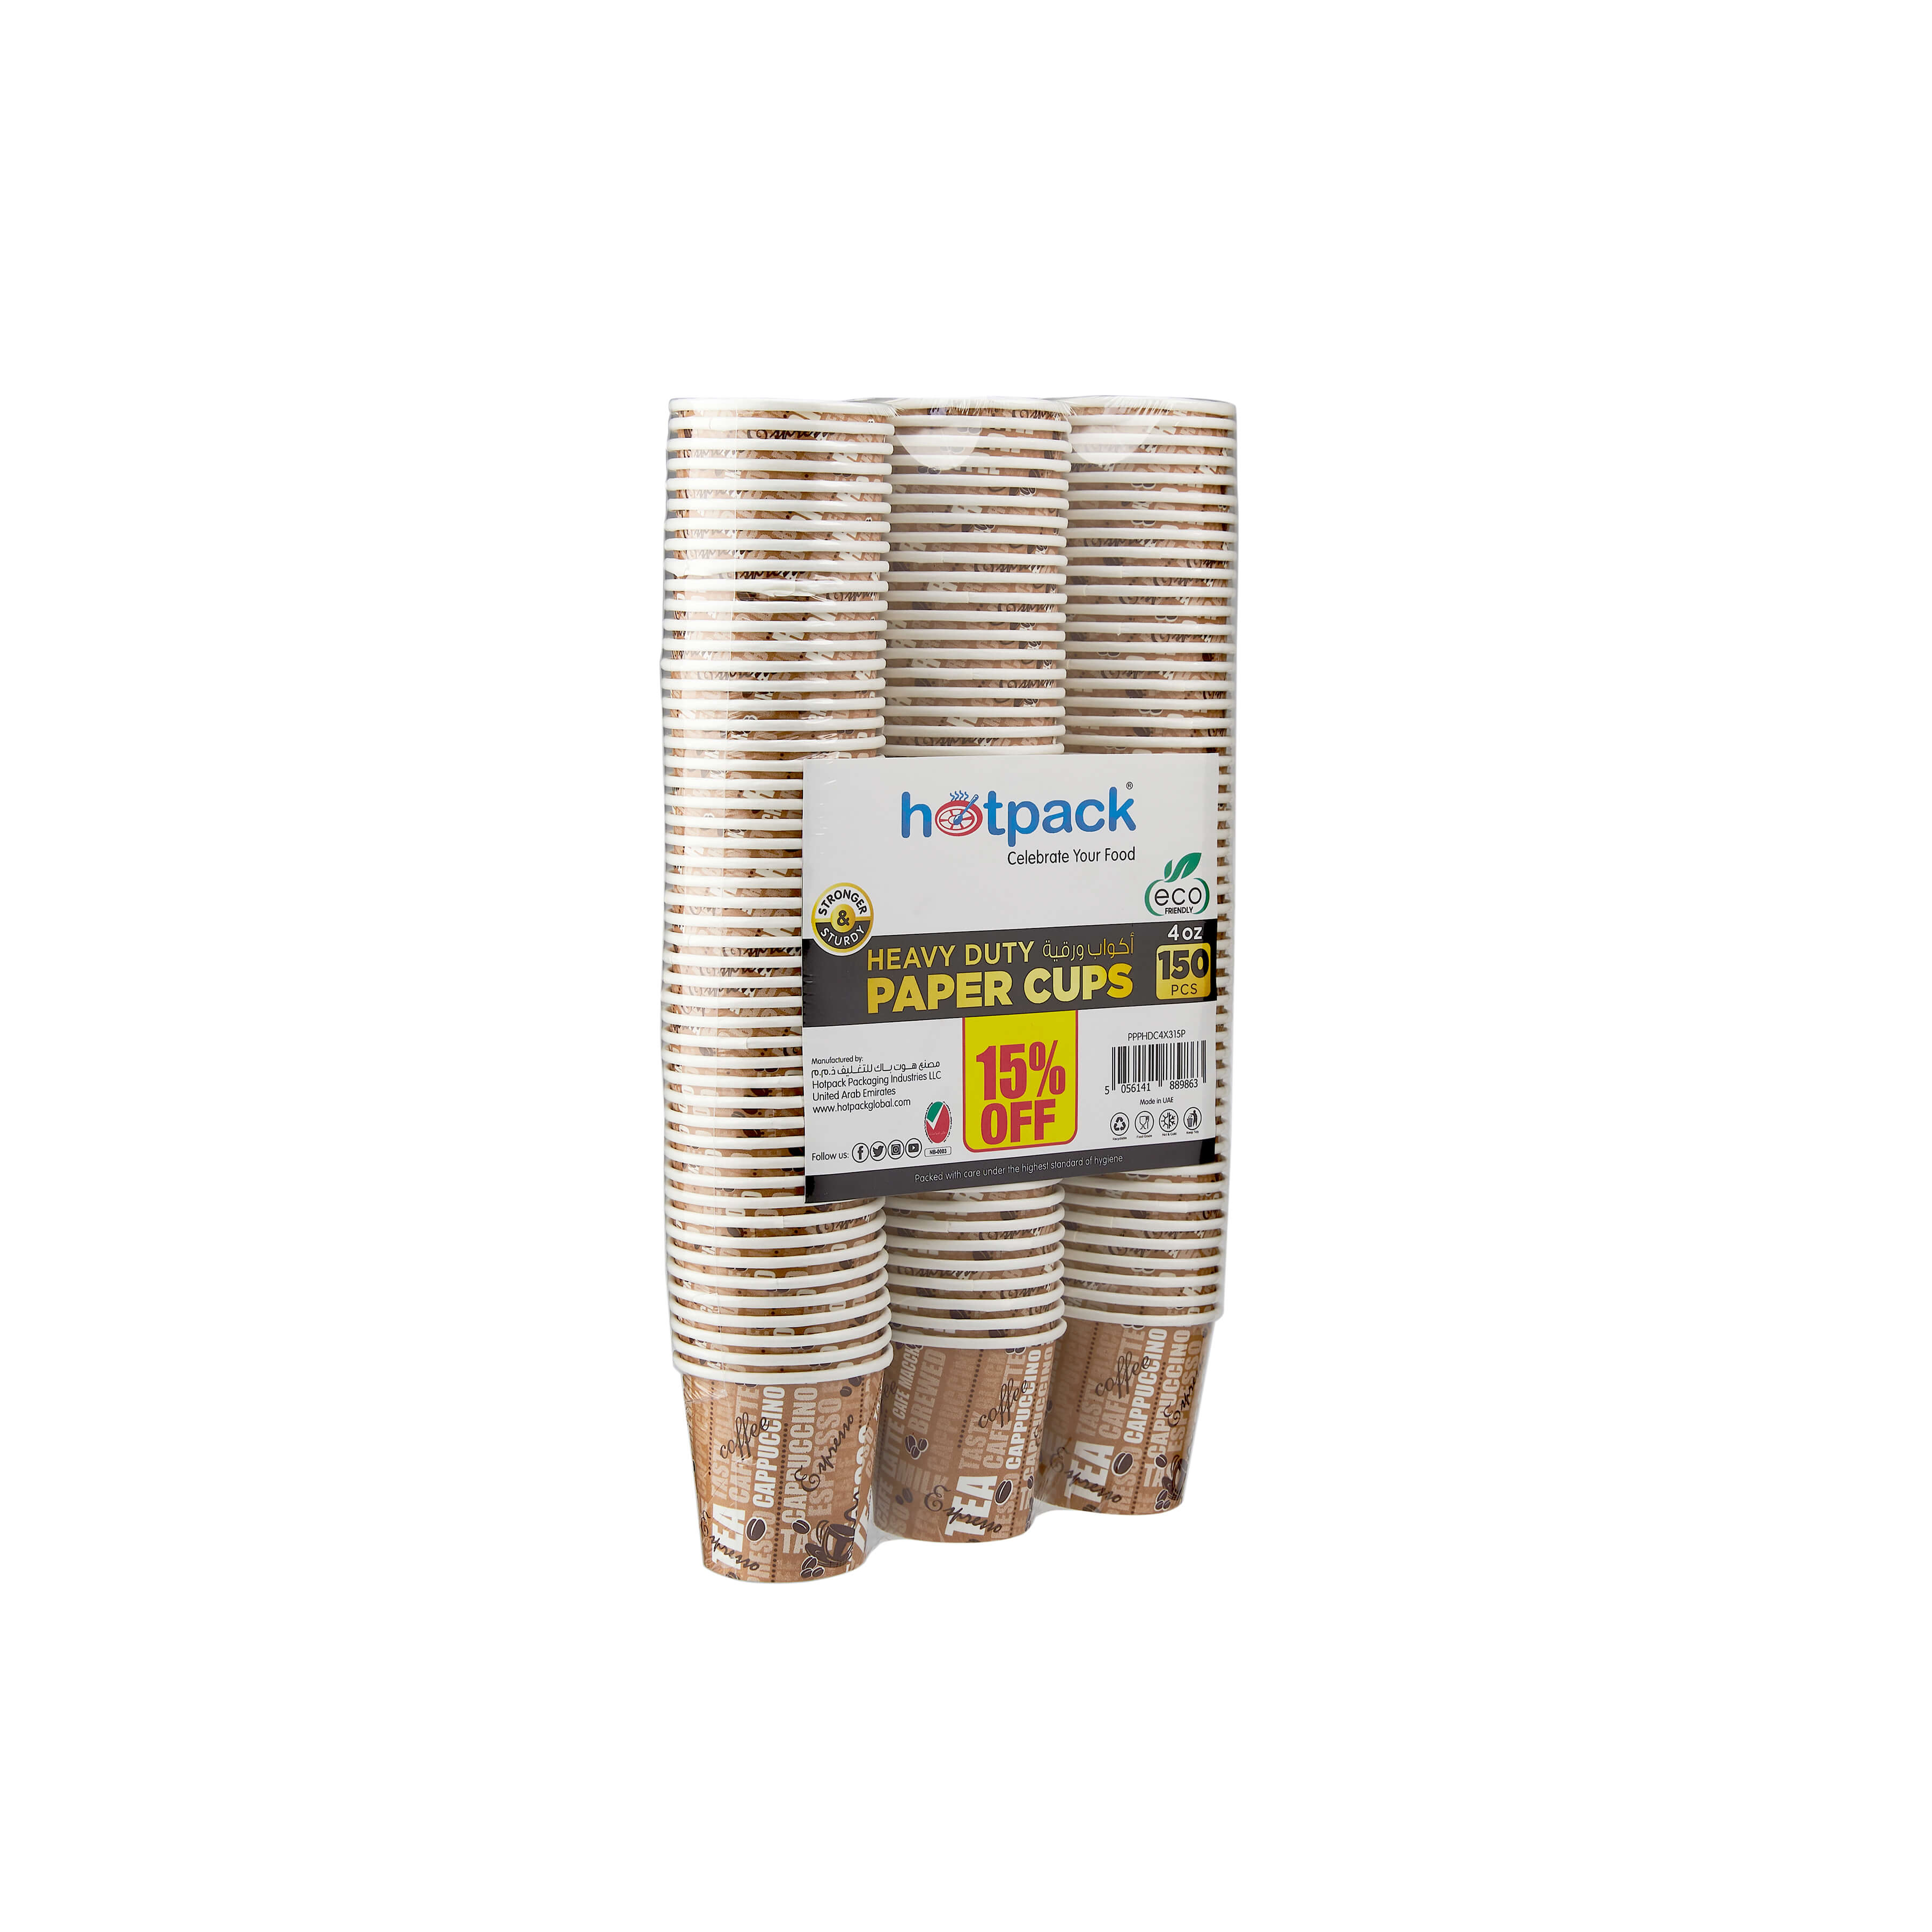 Heavy Duty Paper Cup Offer Pack - hotpackwebstore.com